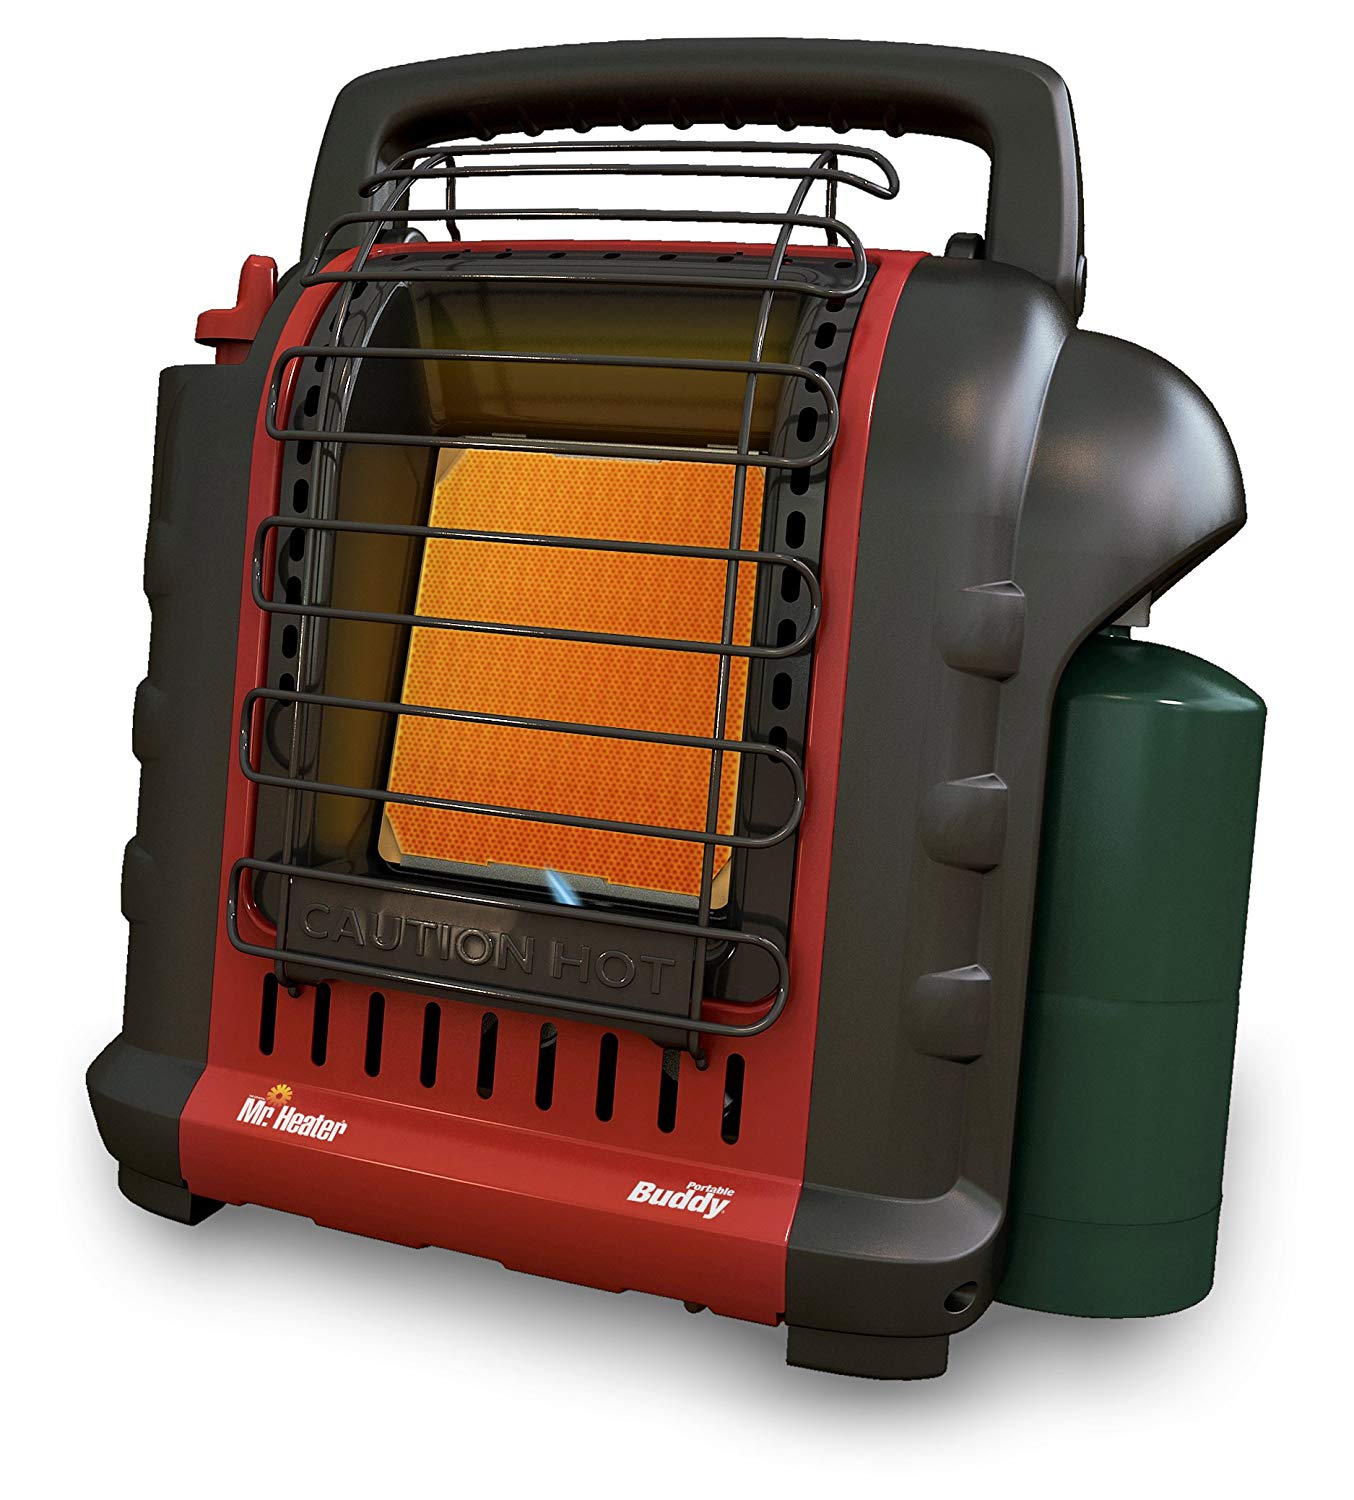 Advice on Propane Heater for Car Camping Tent - Backpacking Light